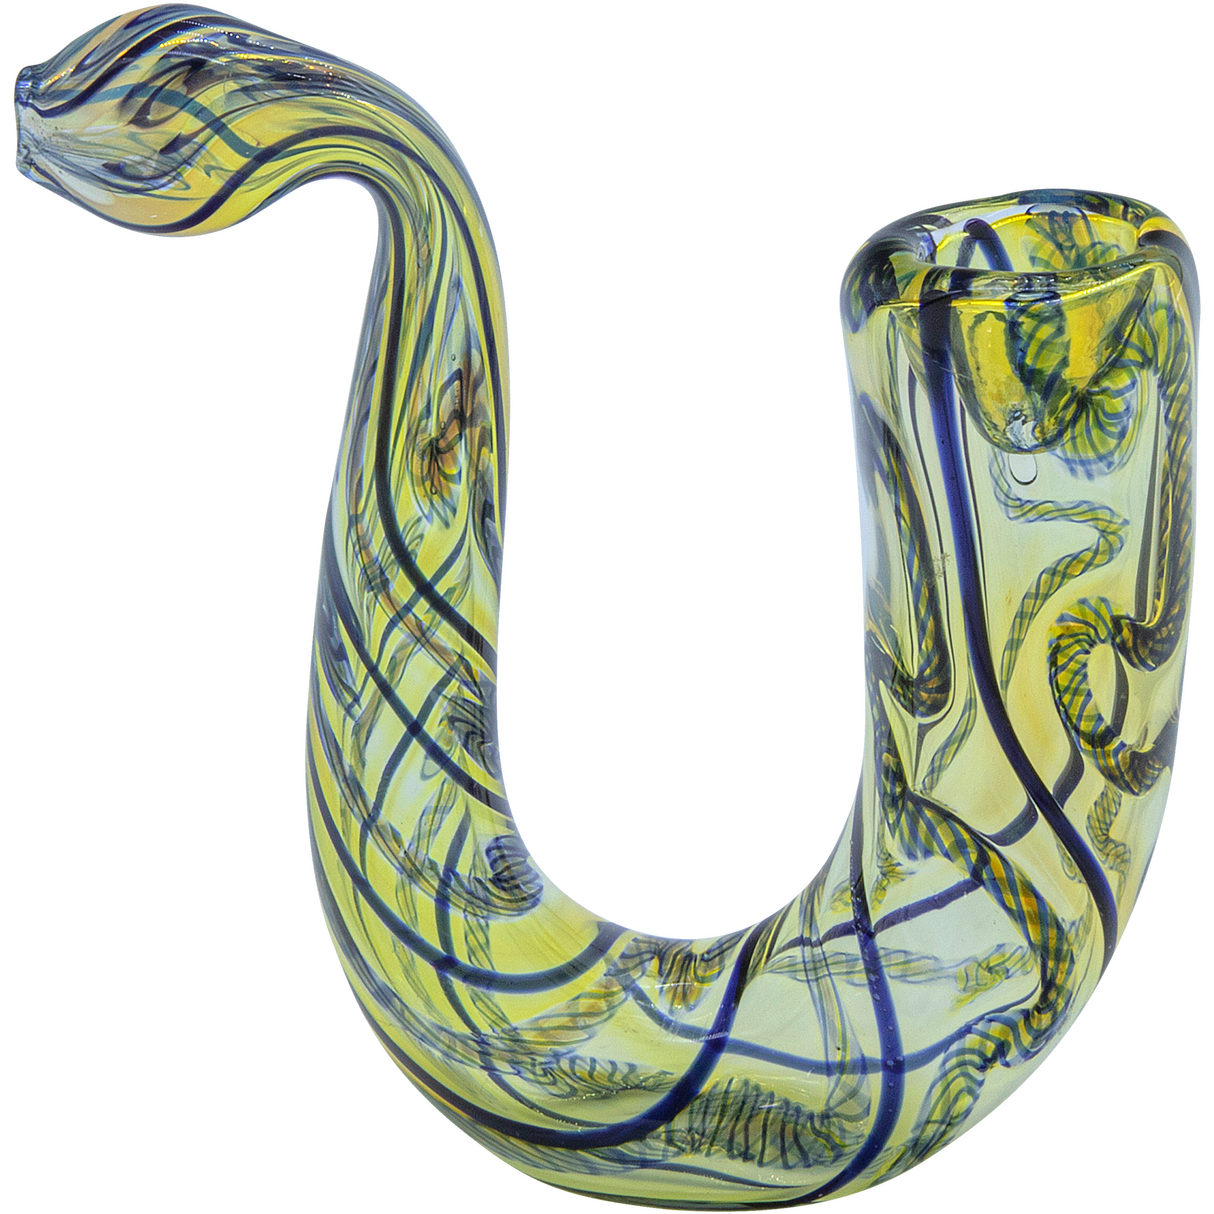 LA Pipes "Gentleman's Sherlock" Pipe in Blue Hues, Fumed Color Changing Glass, Side View